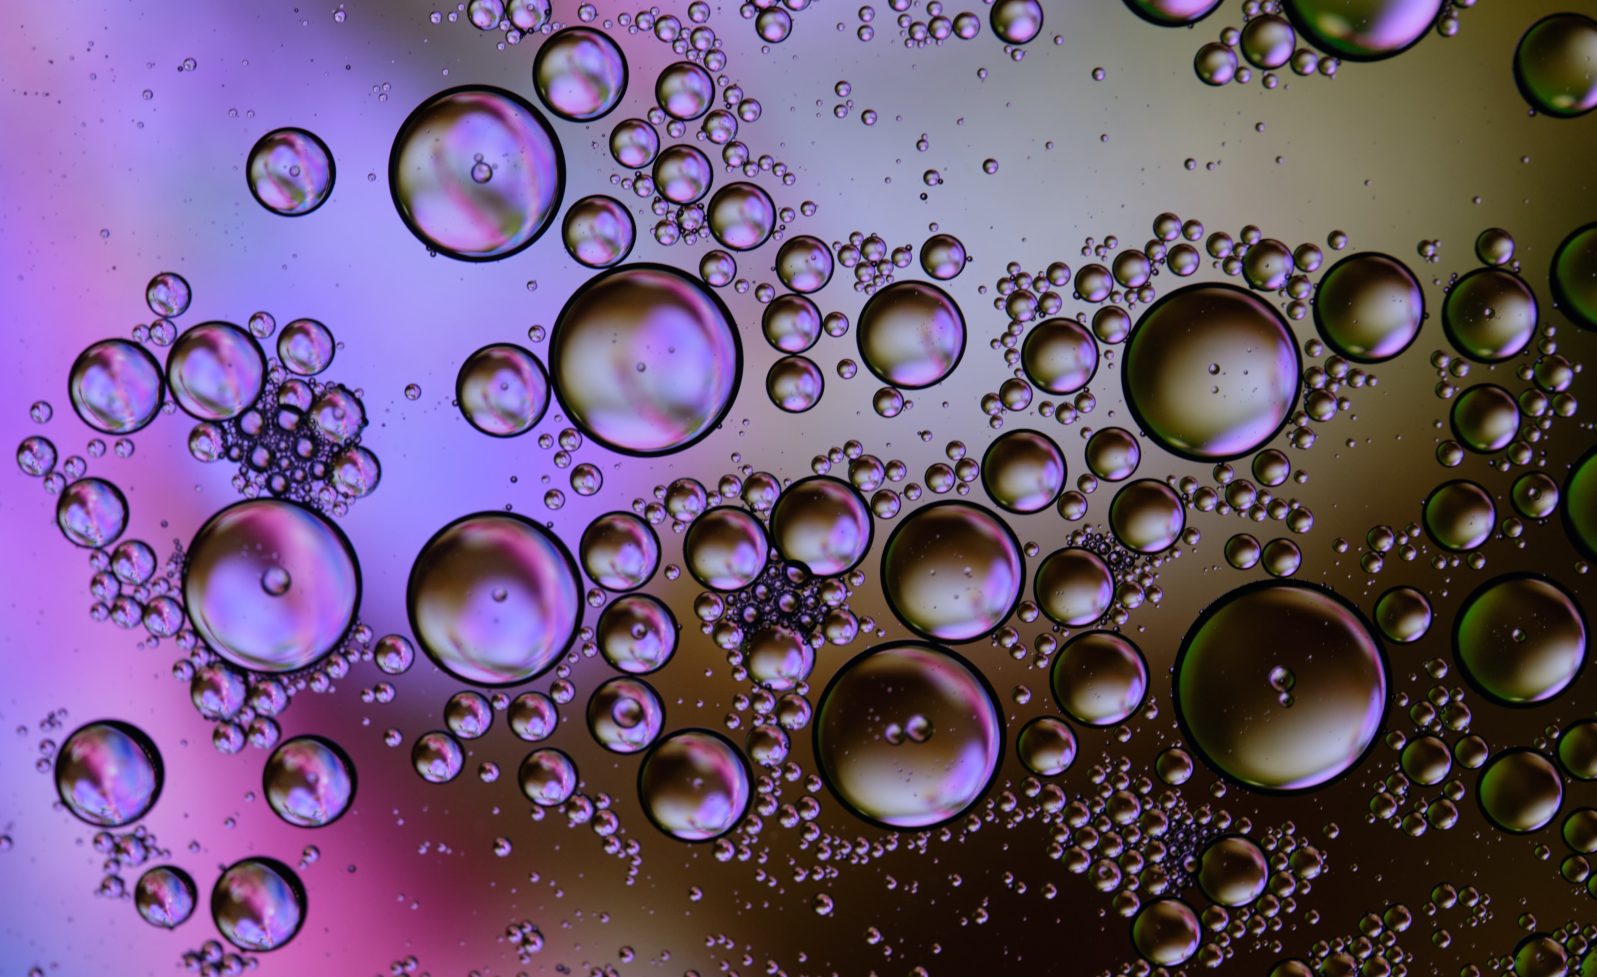 Oil drop on water with illuminated background